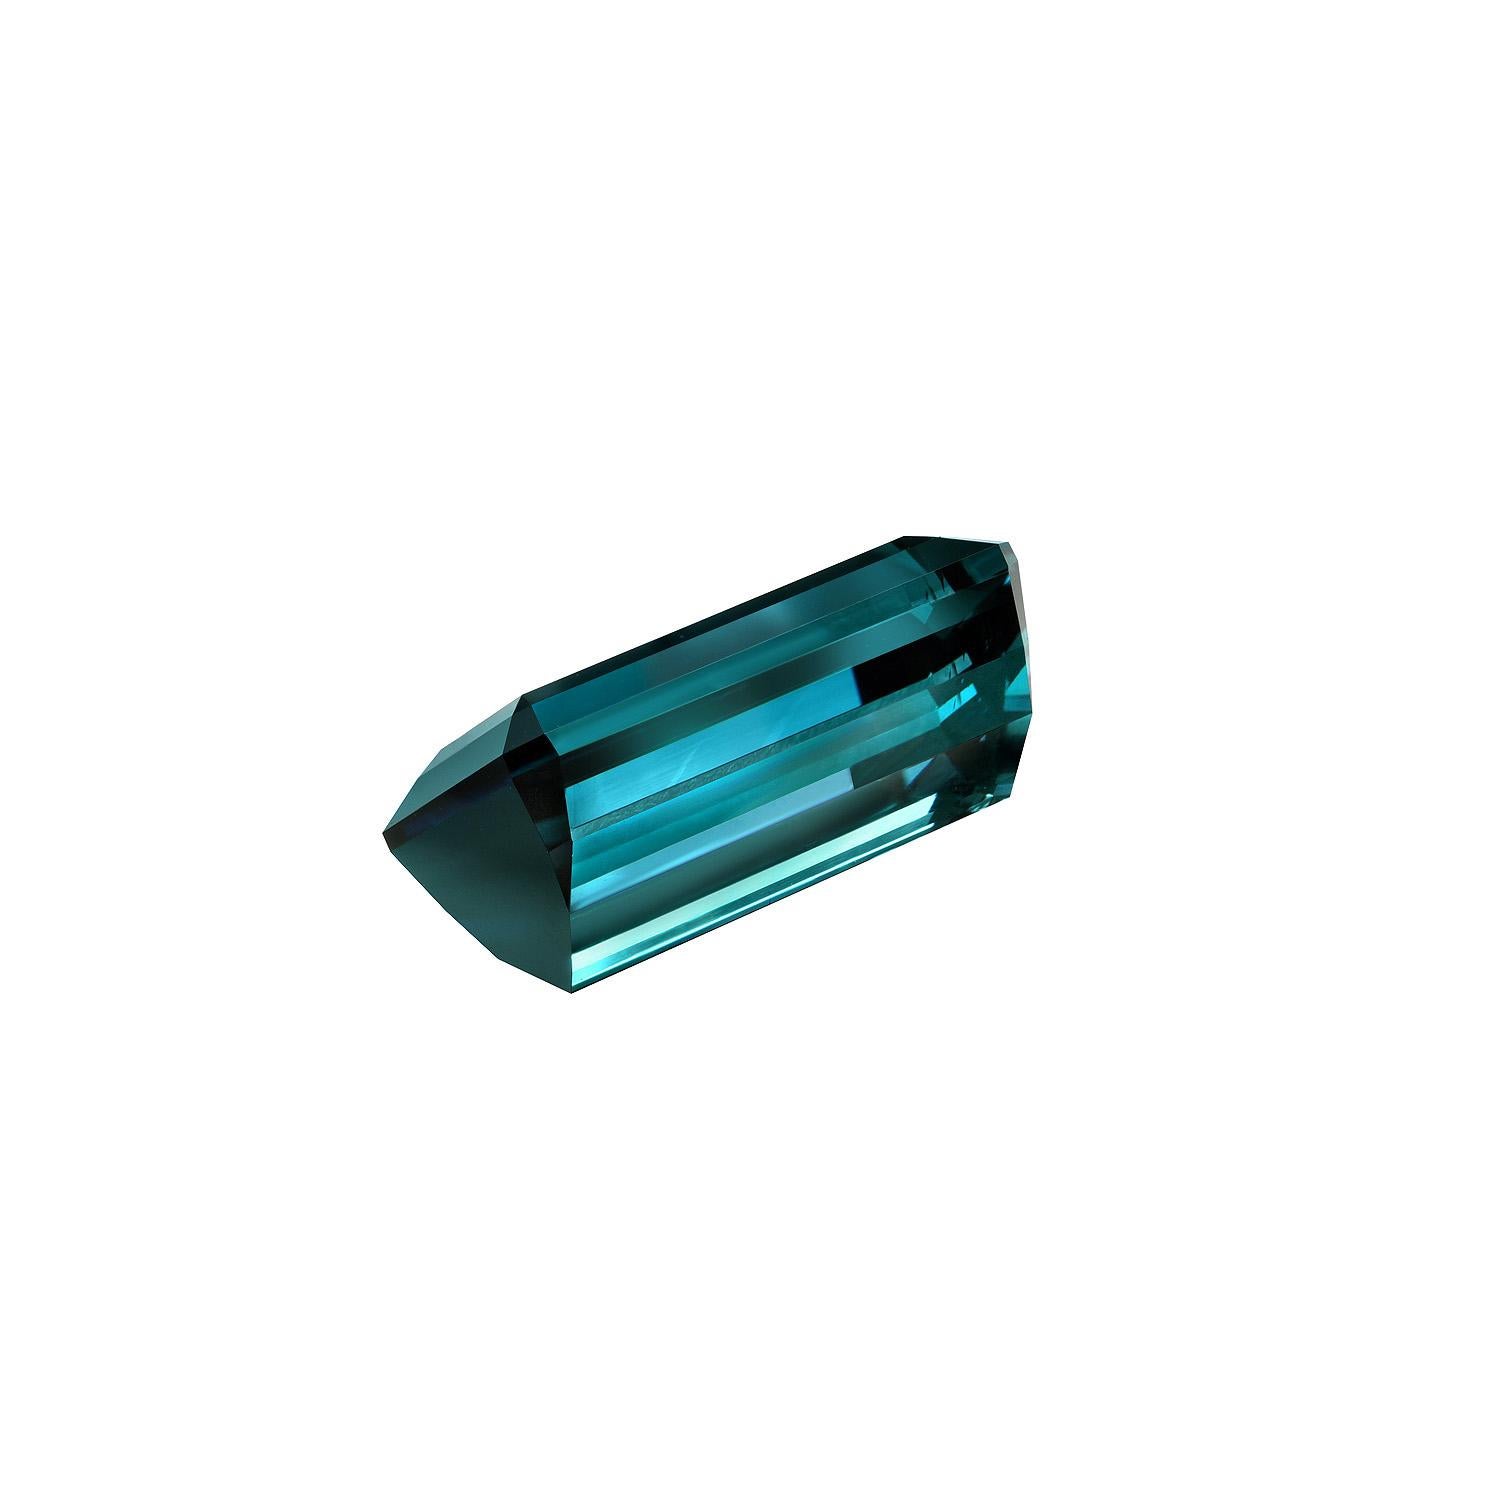 Exceptional 8.20 carat exotic Indicolite Tourmaline gem, offered loose to a fine gemstone collector.
Returns are accepted and paid by us within 7 days of delivery.
We offer supreme custom jewelry work upon request. Please contact us for more